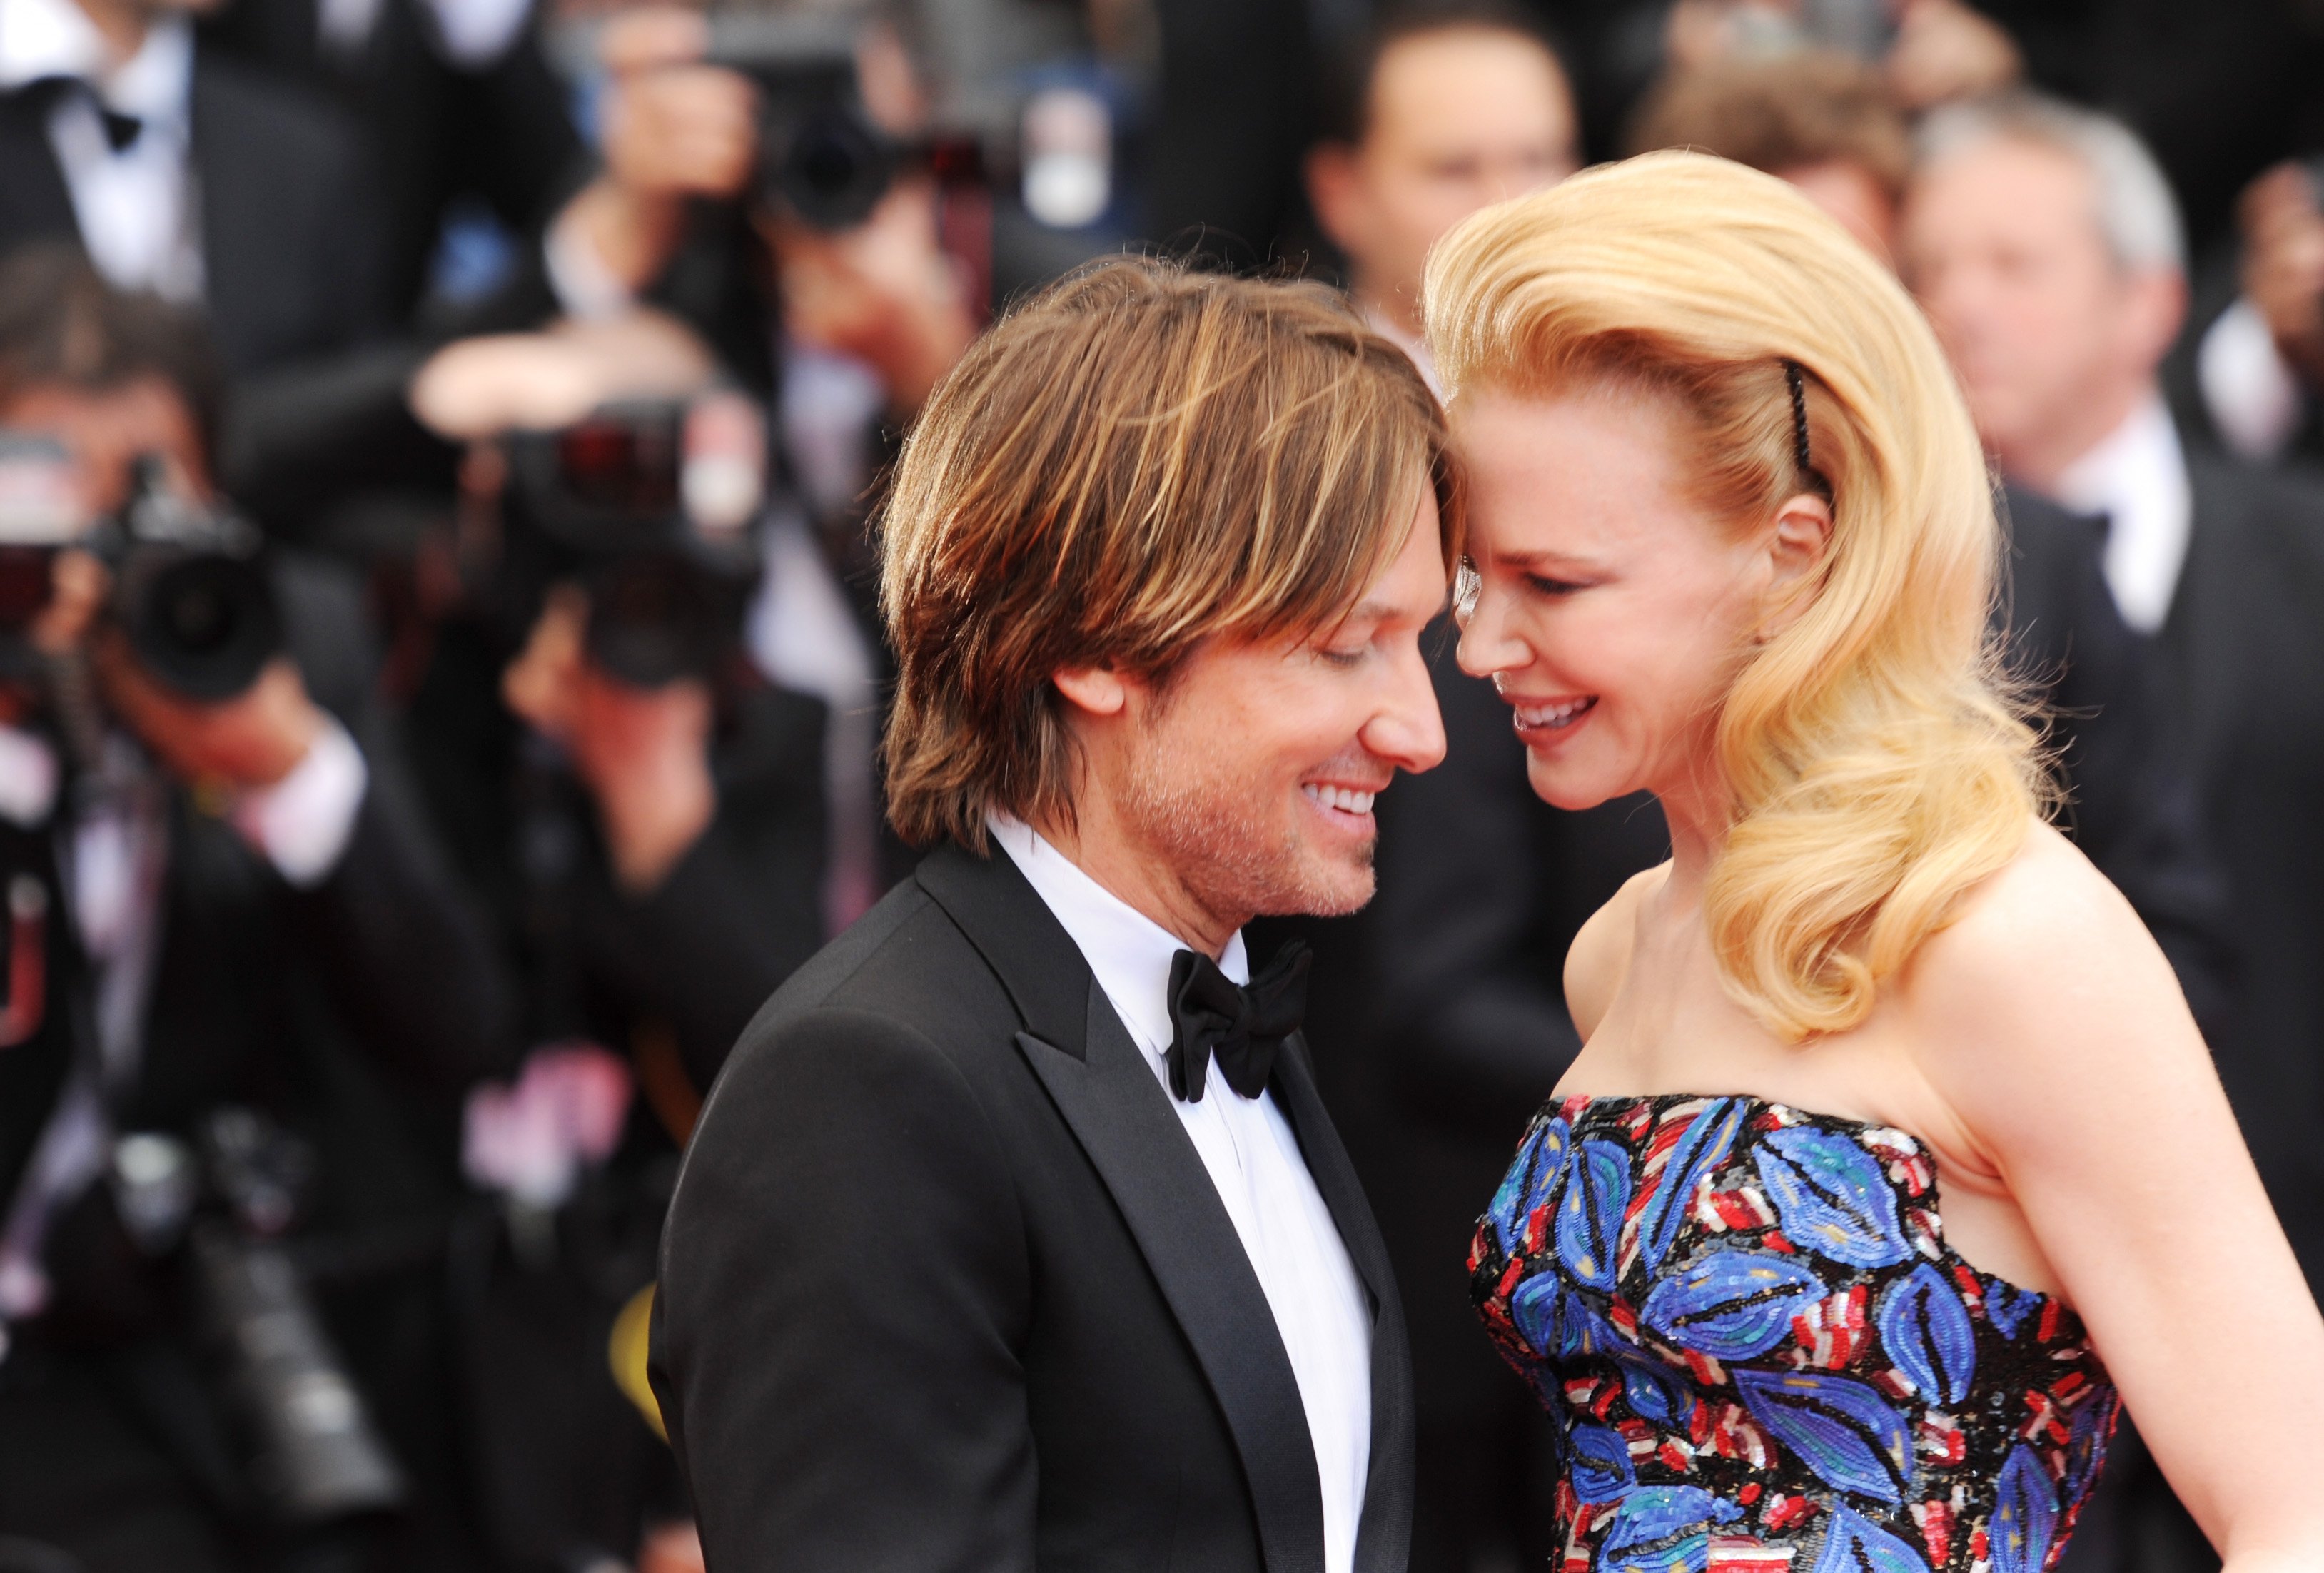 Keith Urban and Nicole Kidman on May 19, 2013 in Cannes, France | Source: Getty Images